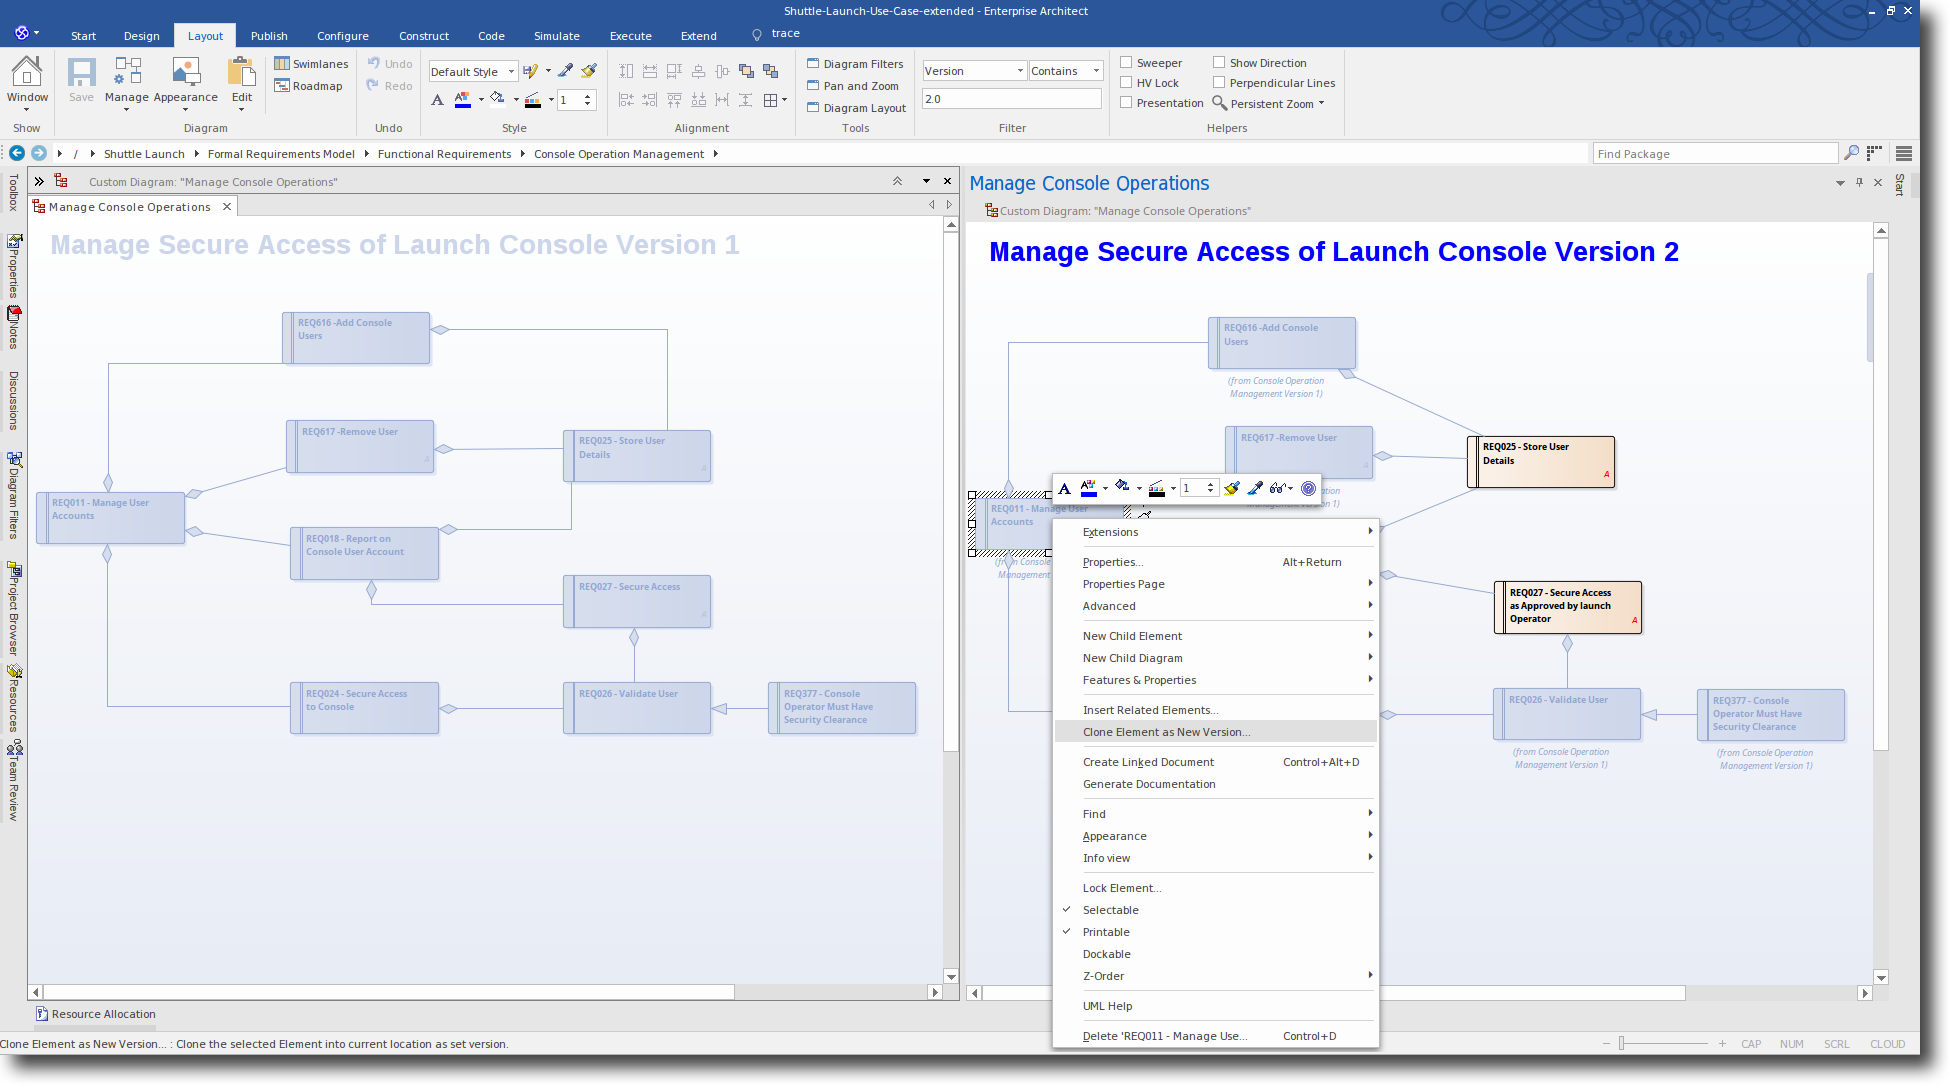 Enterprise Architect 13: Time Aware Modeling - Create a Clone Element as New Version